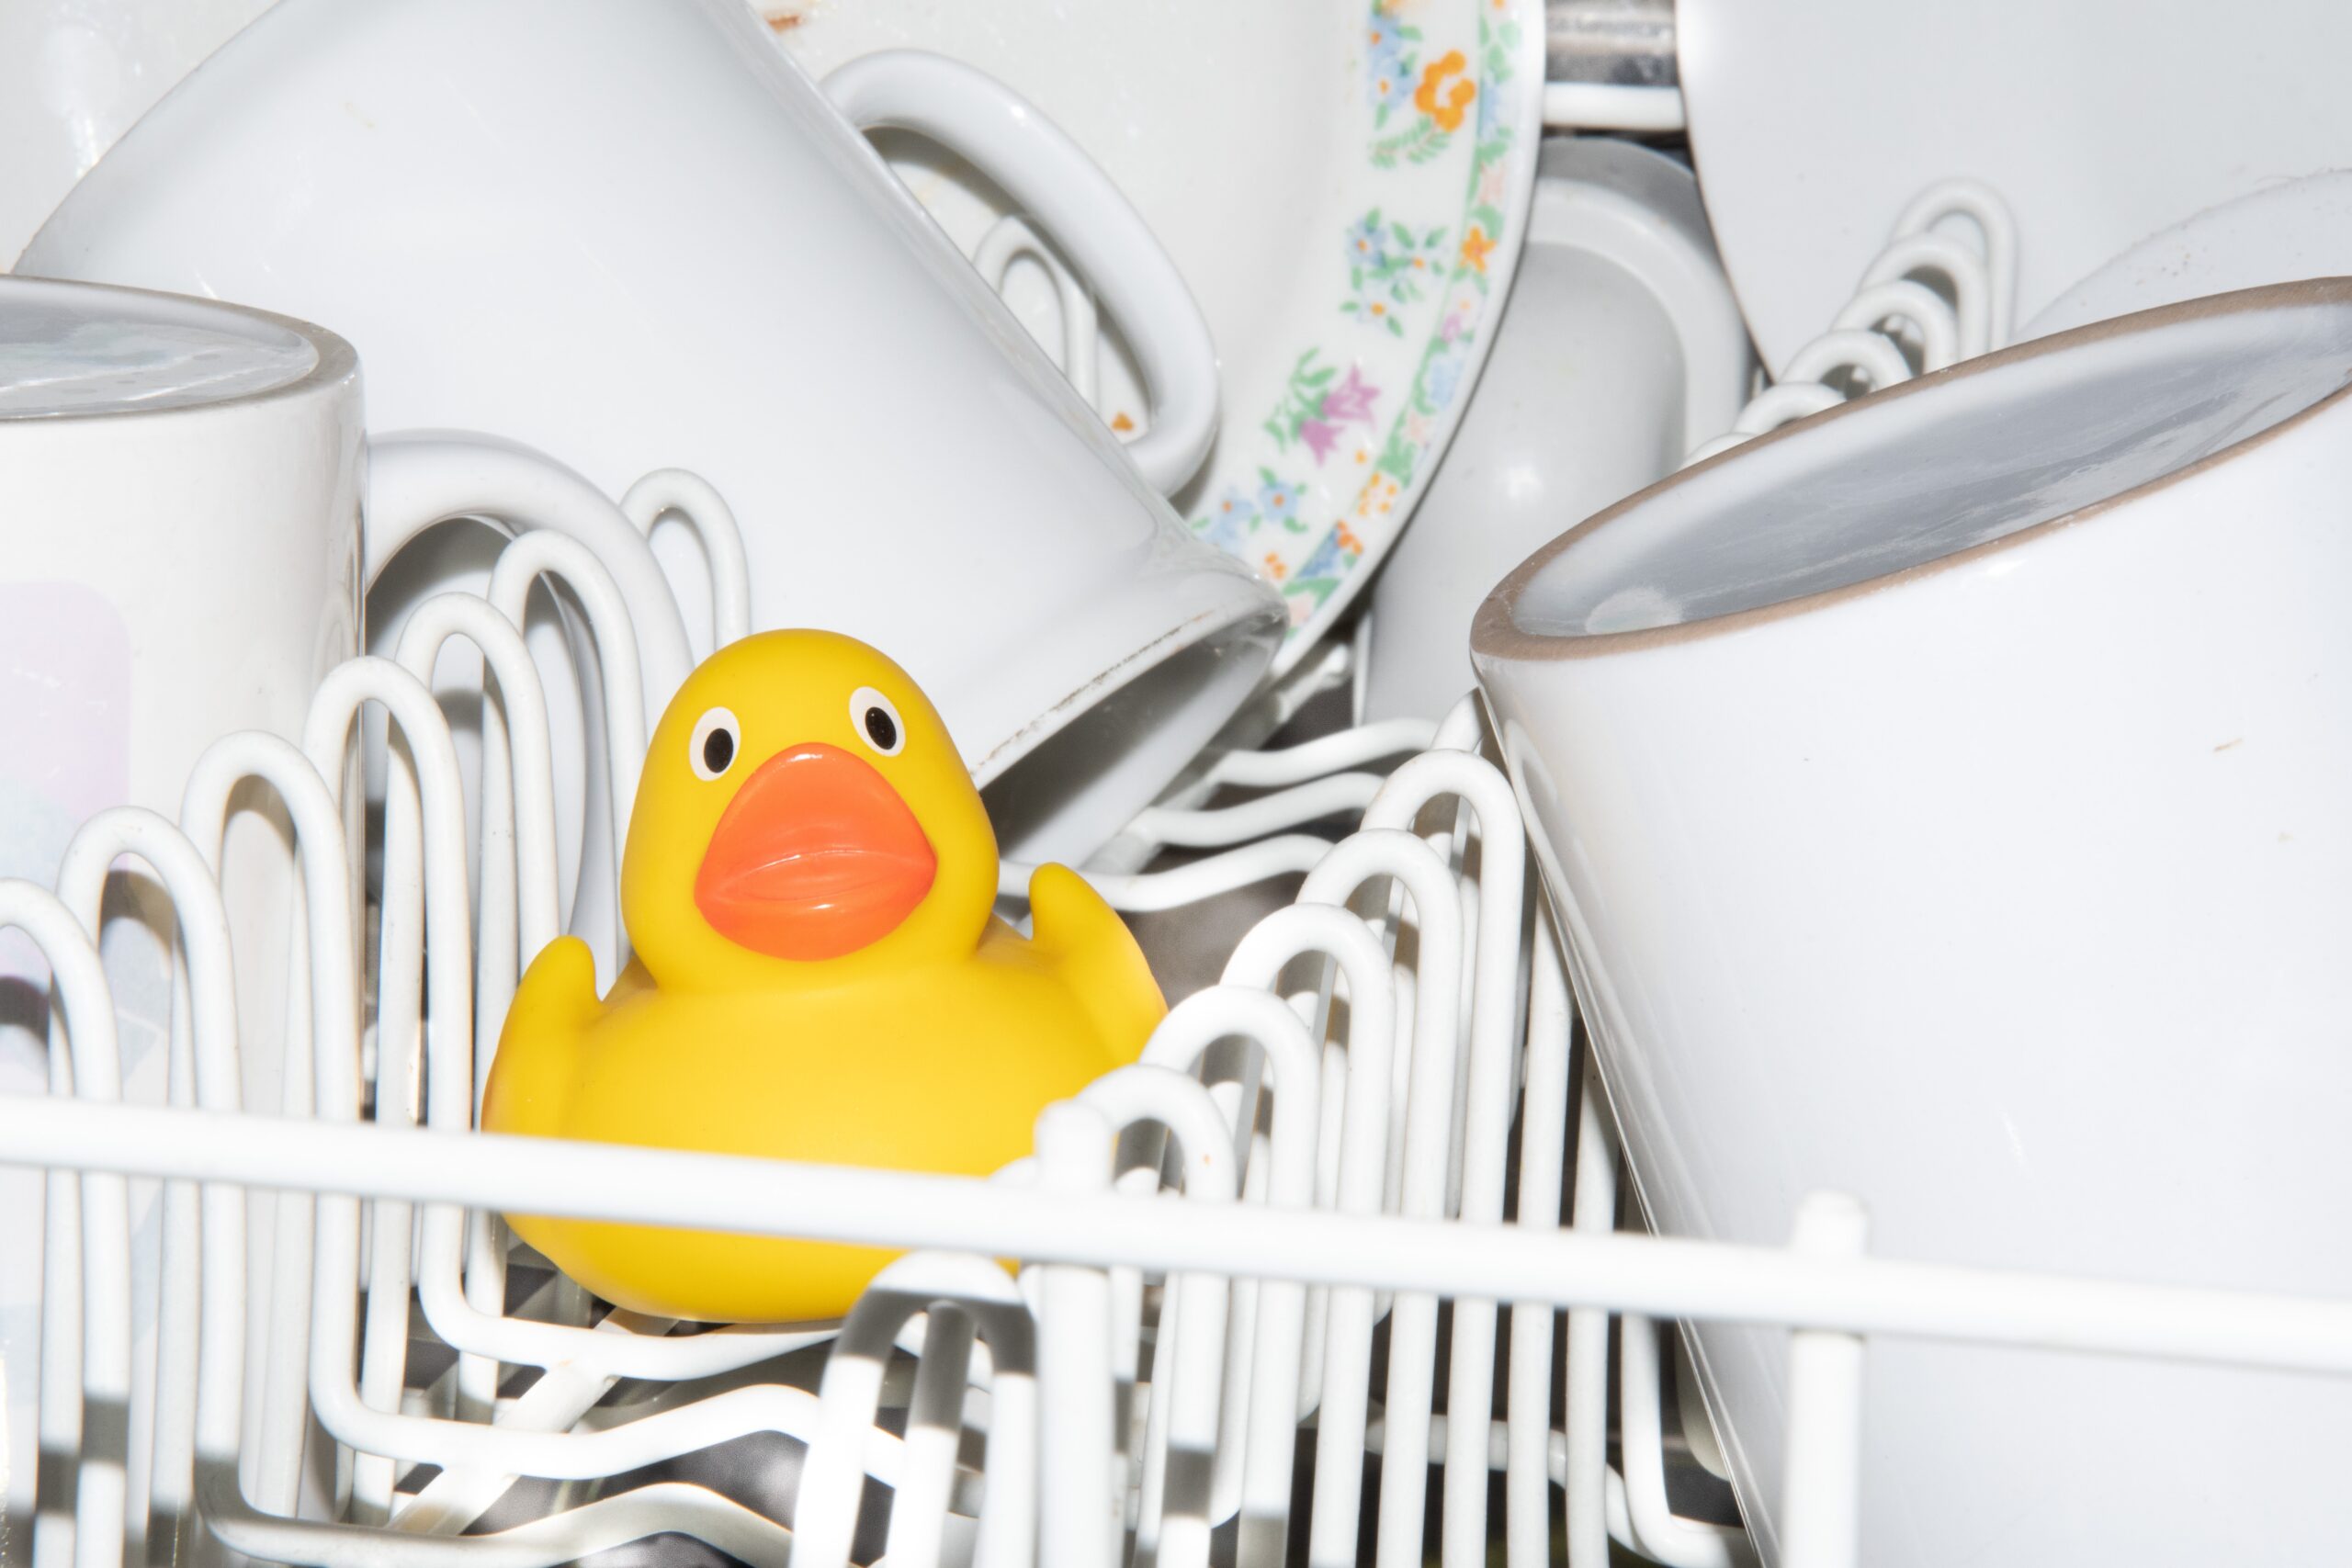 Load Your Dishwasher Like a Pro's featured image